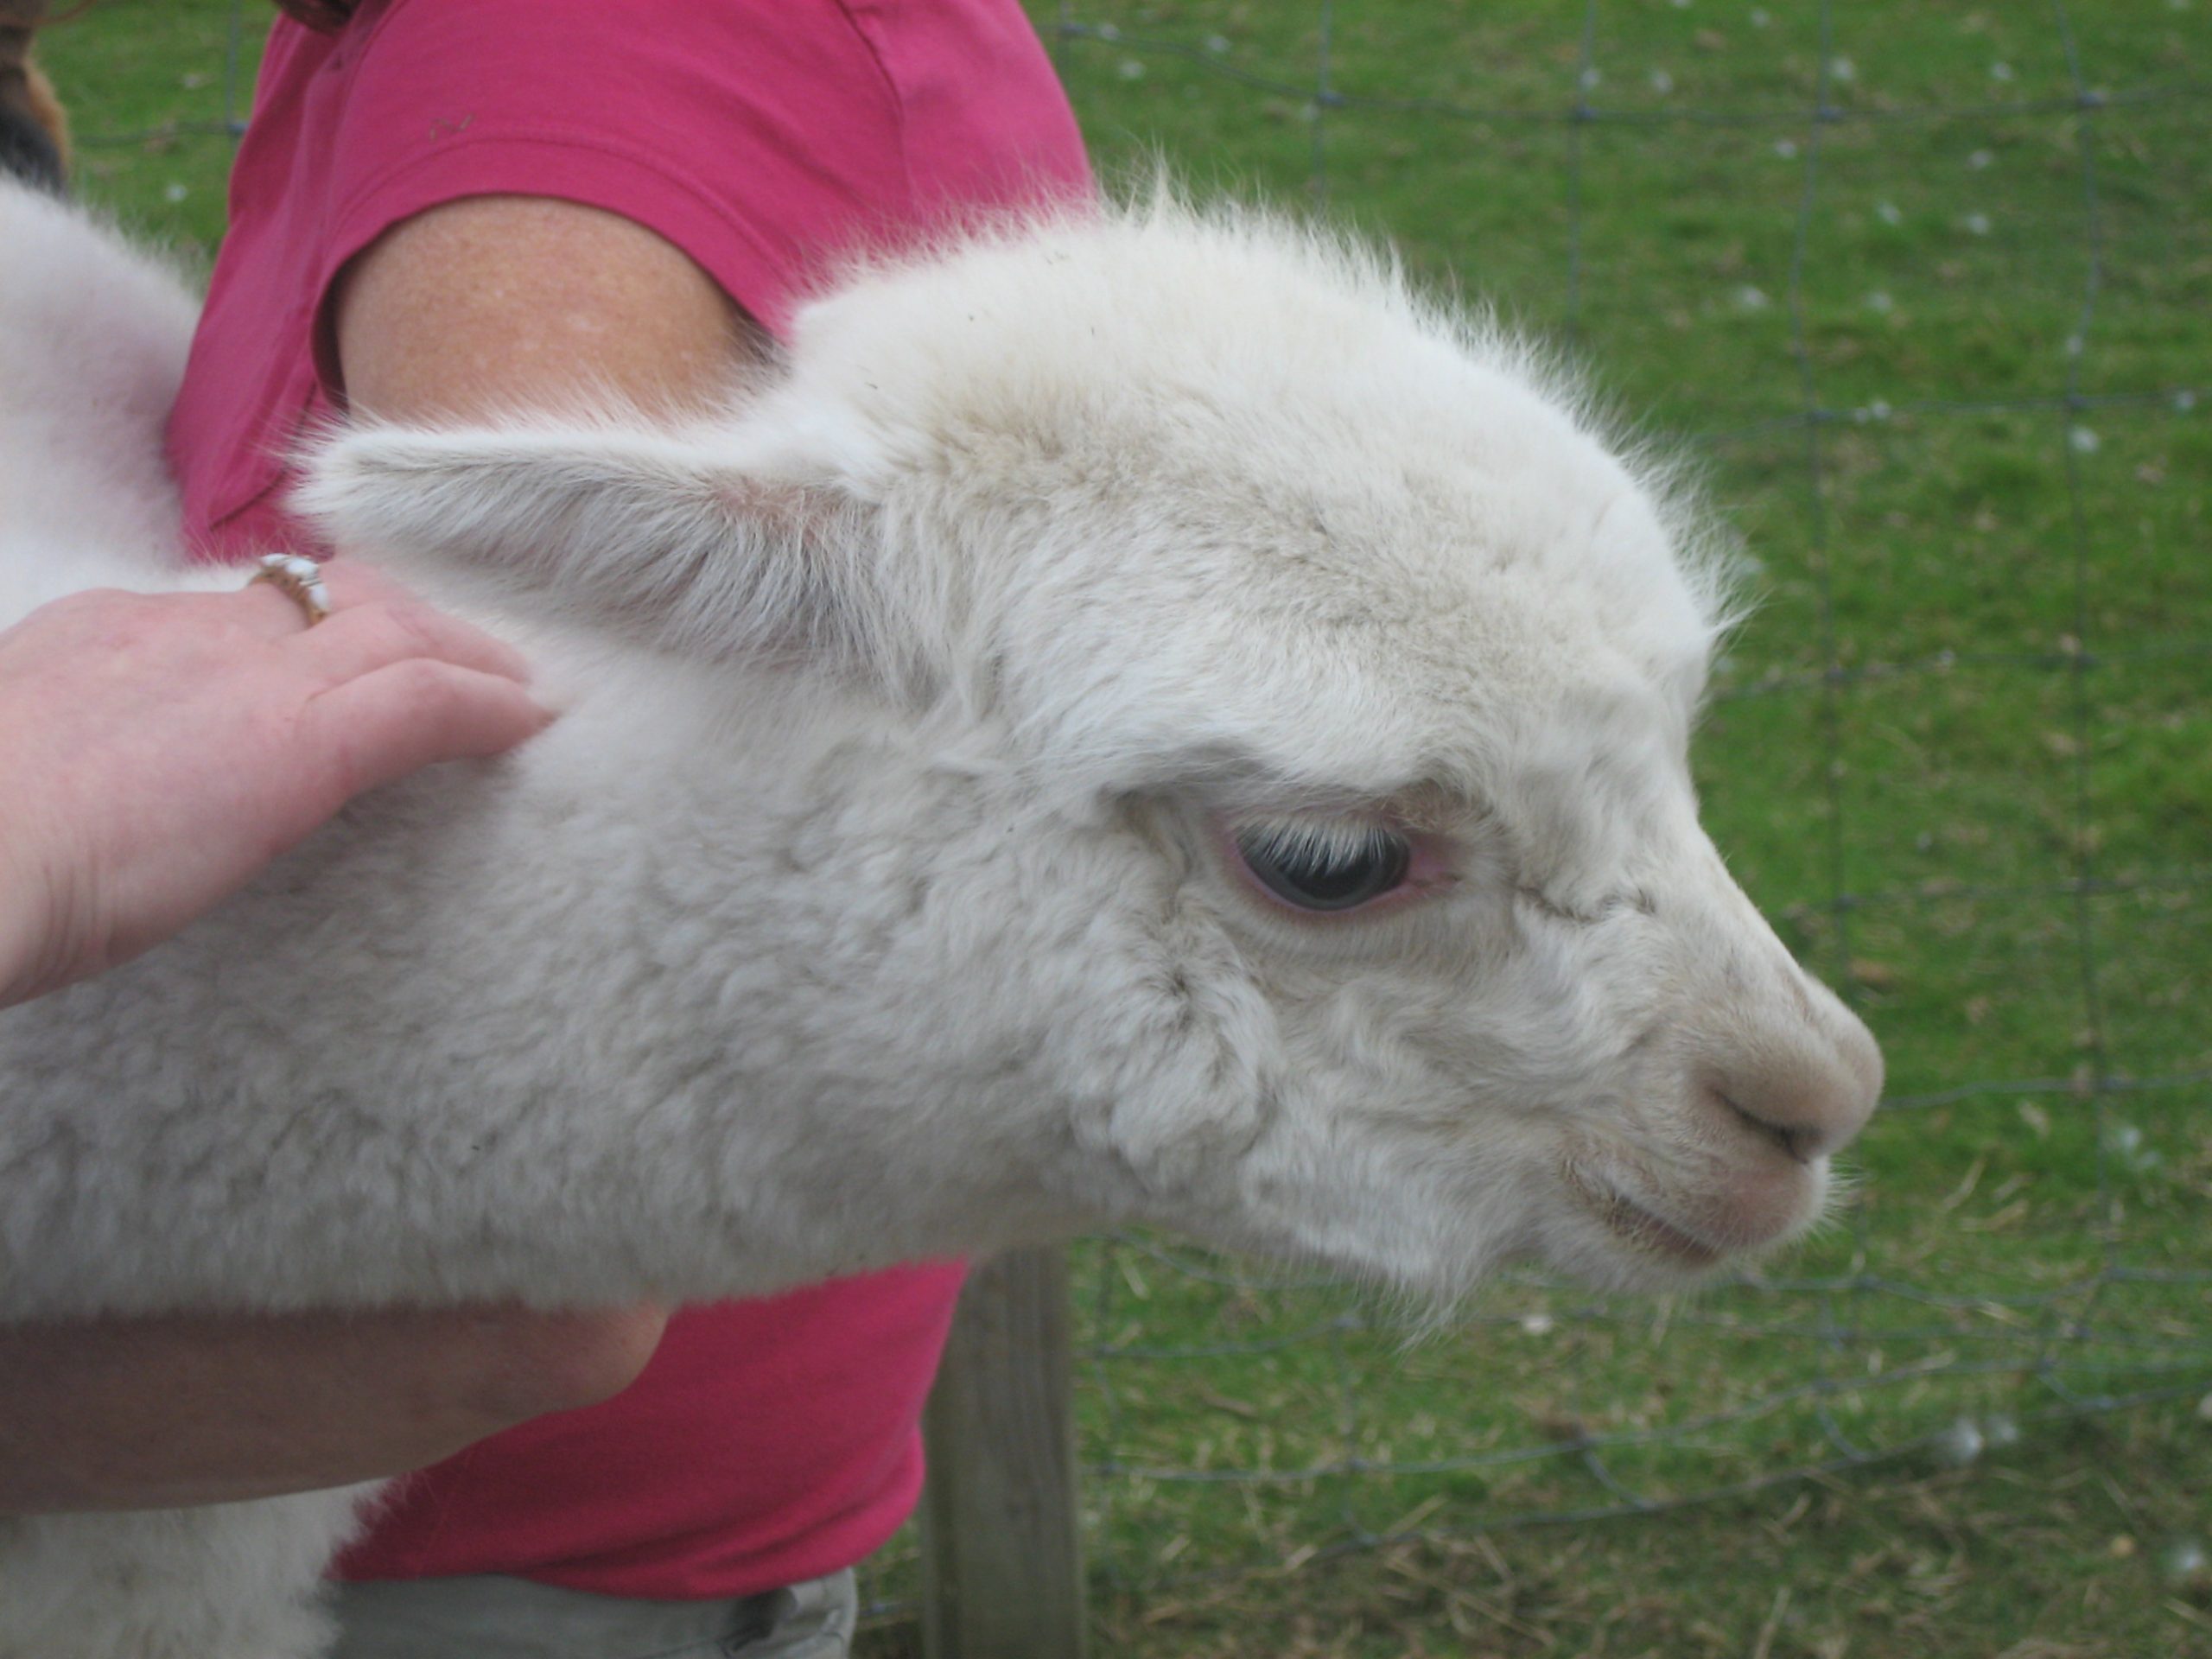 Young Alpaca (user submitted)